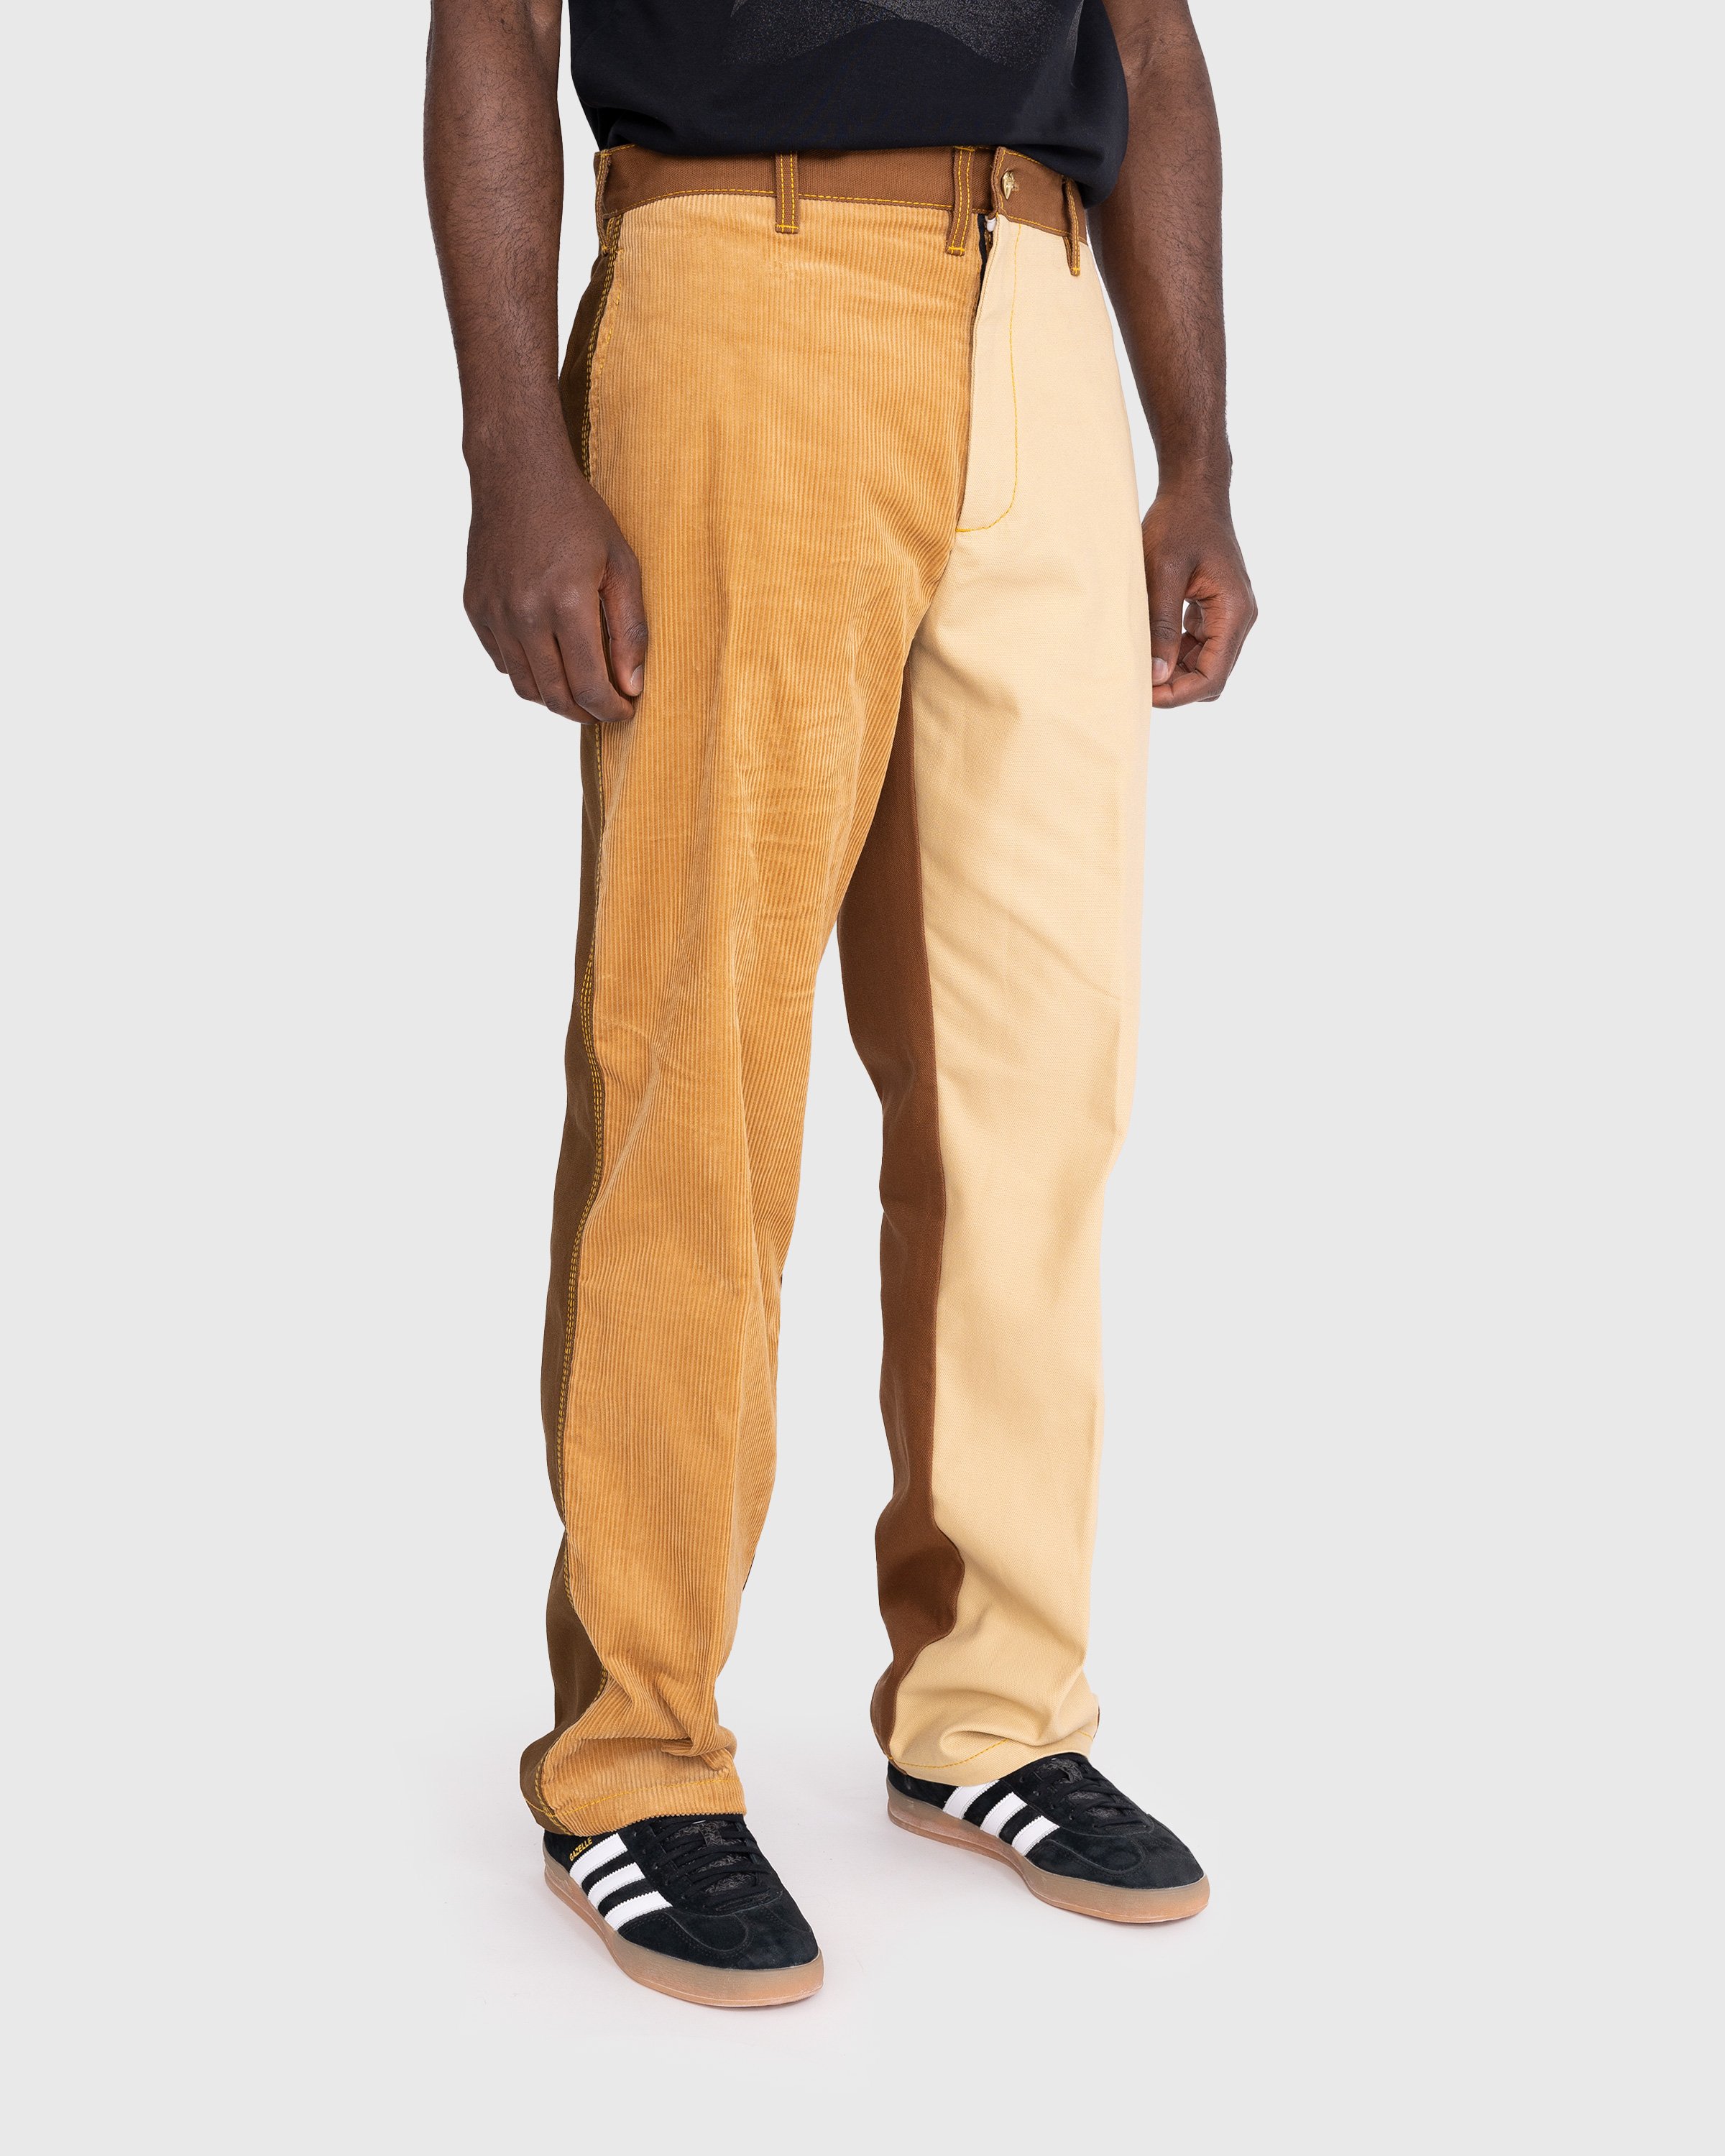 Marni x Carhartt WIP - Colorblocked Trousers Brown - Clothing - Brown - Image 3